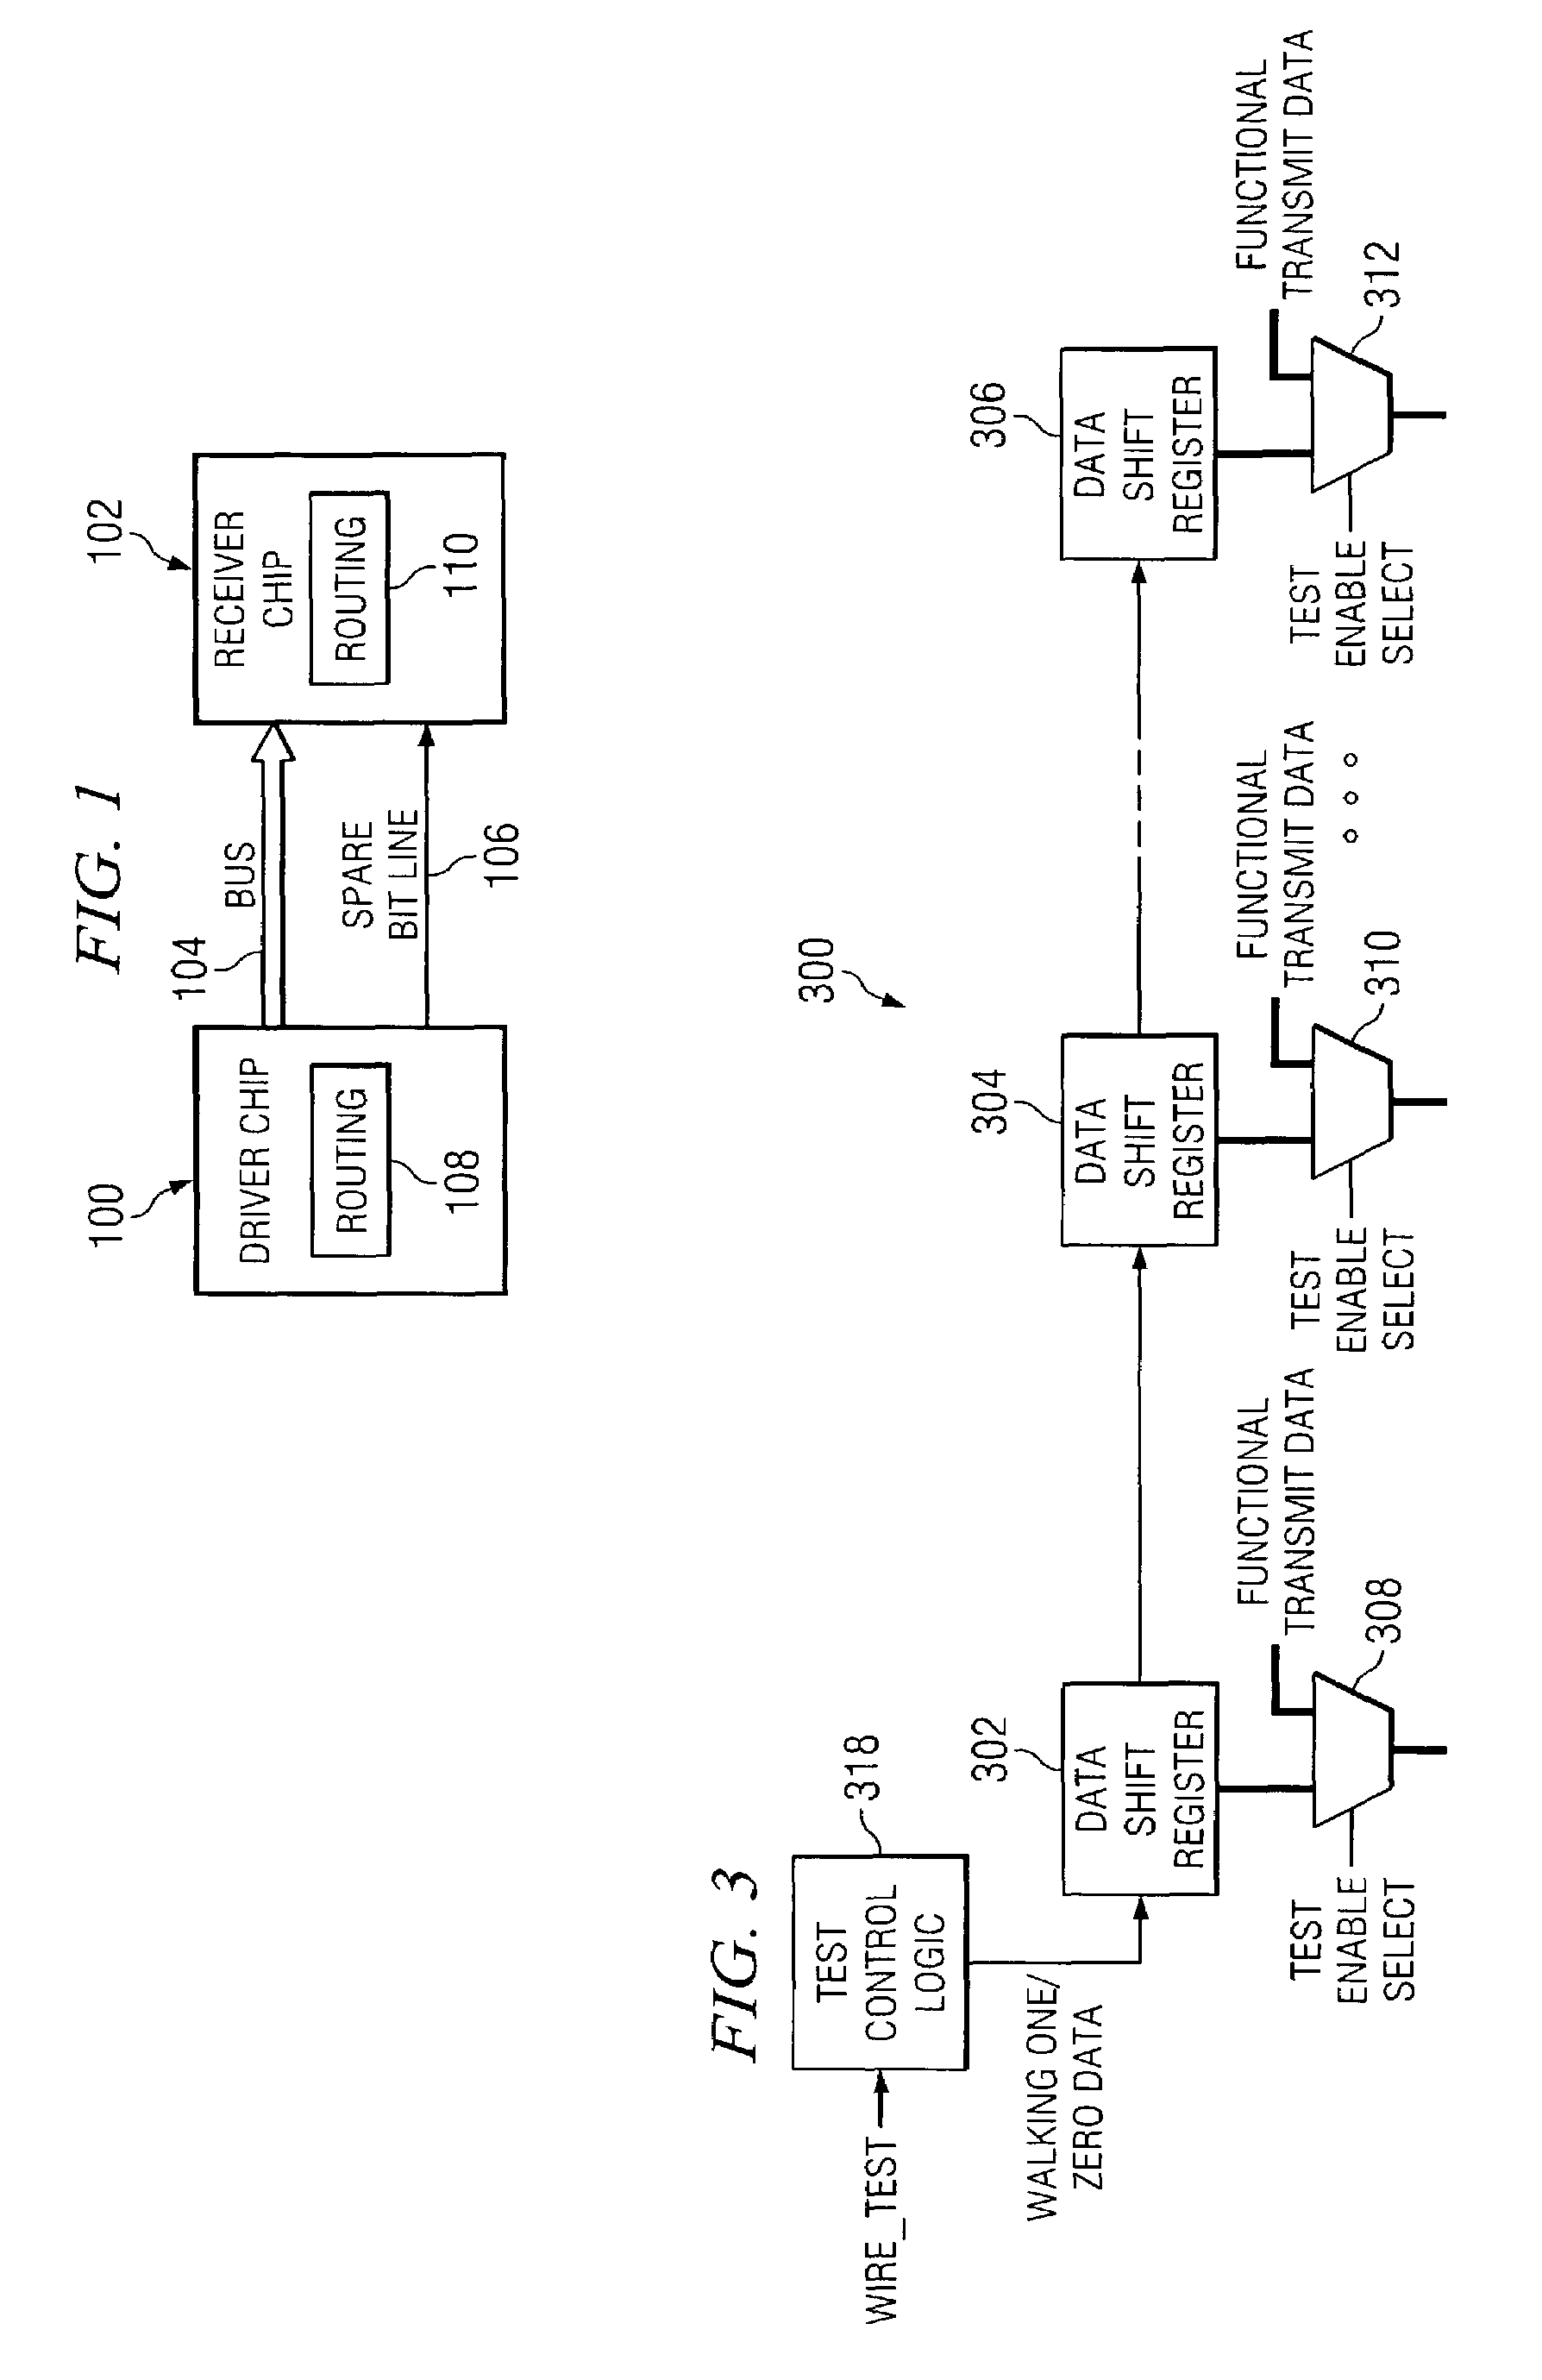 Self-healing chip-to-chip interface